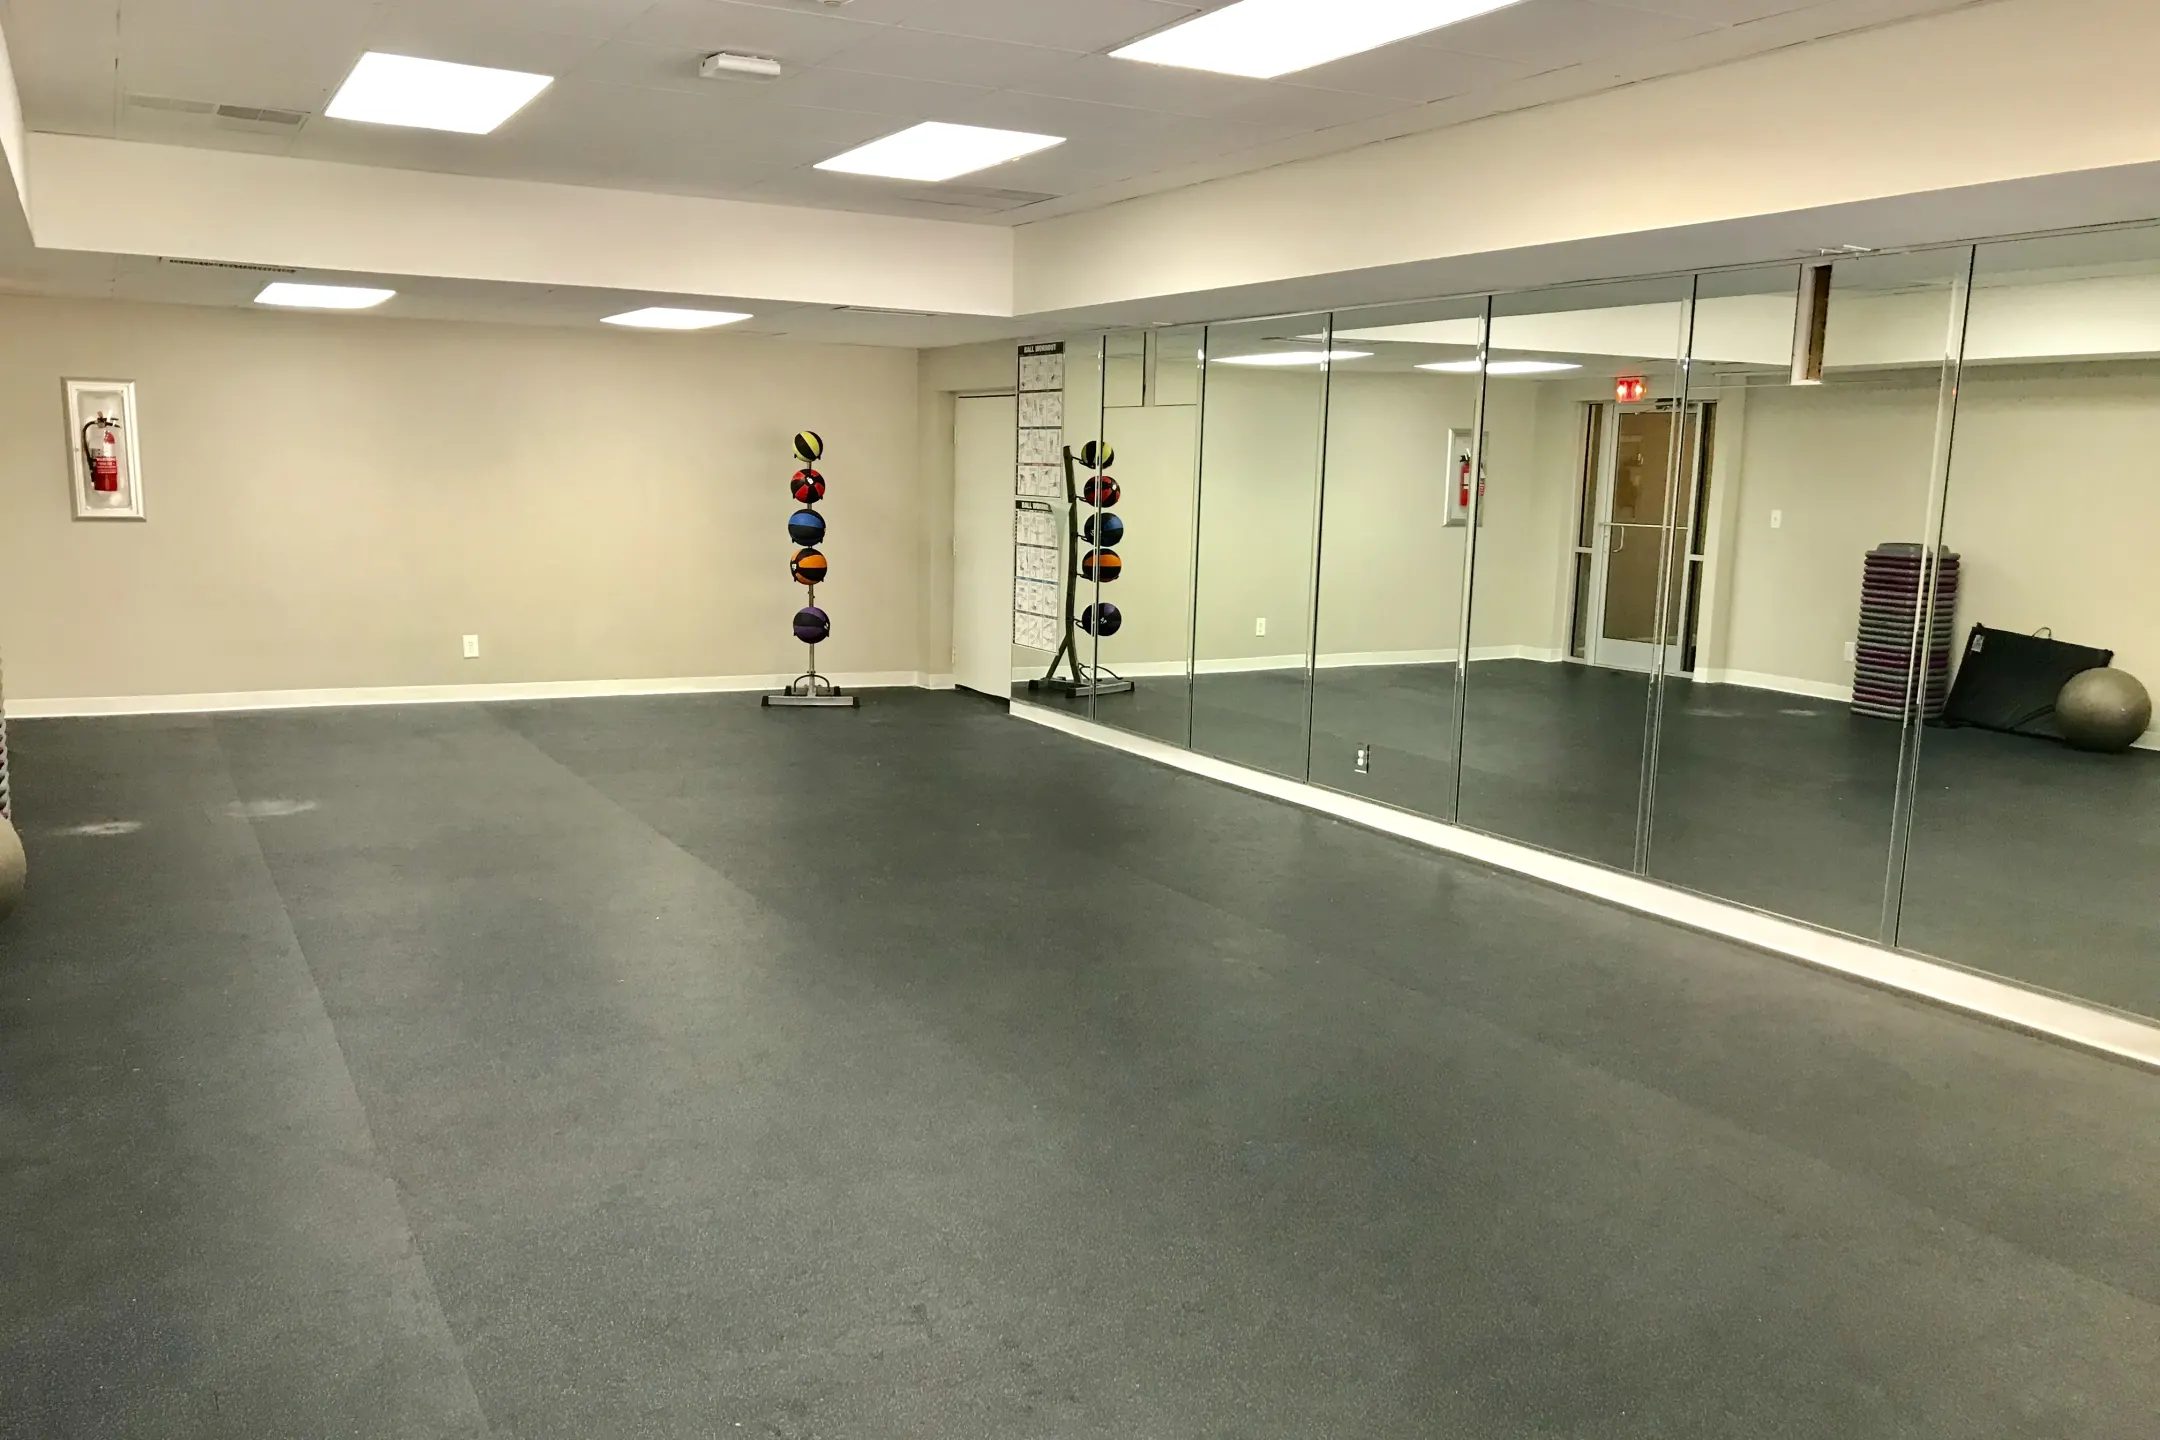 Fitness Weight Room - District At West Market Apartments - Greensboro, NC